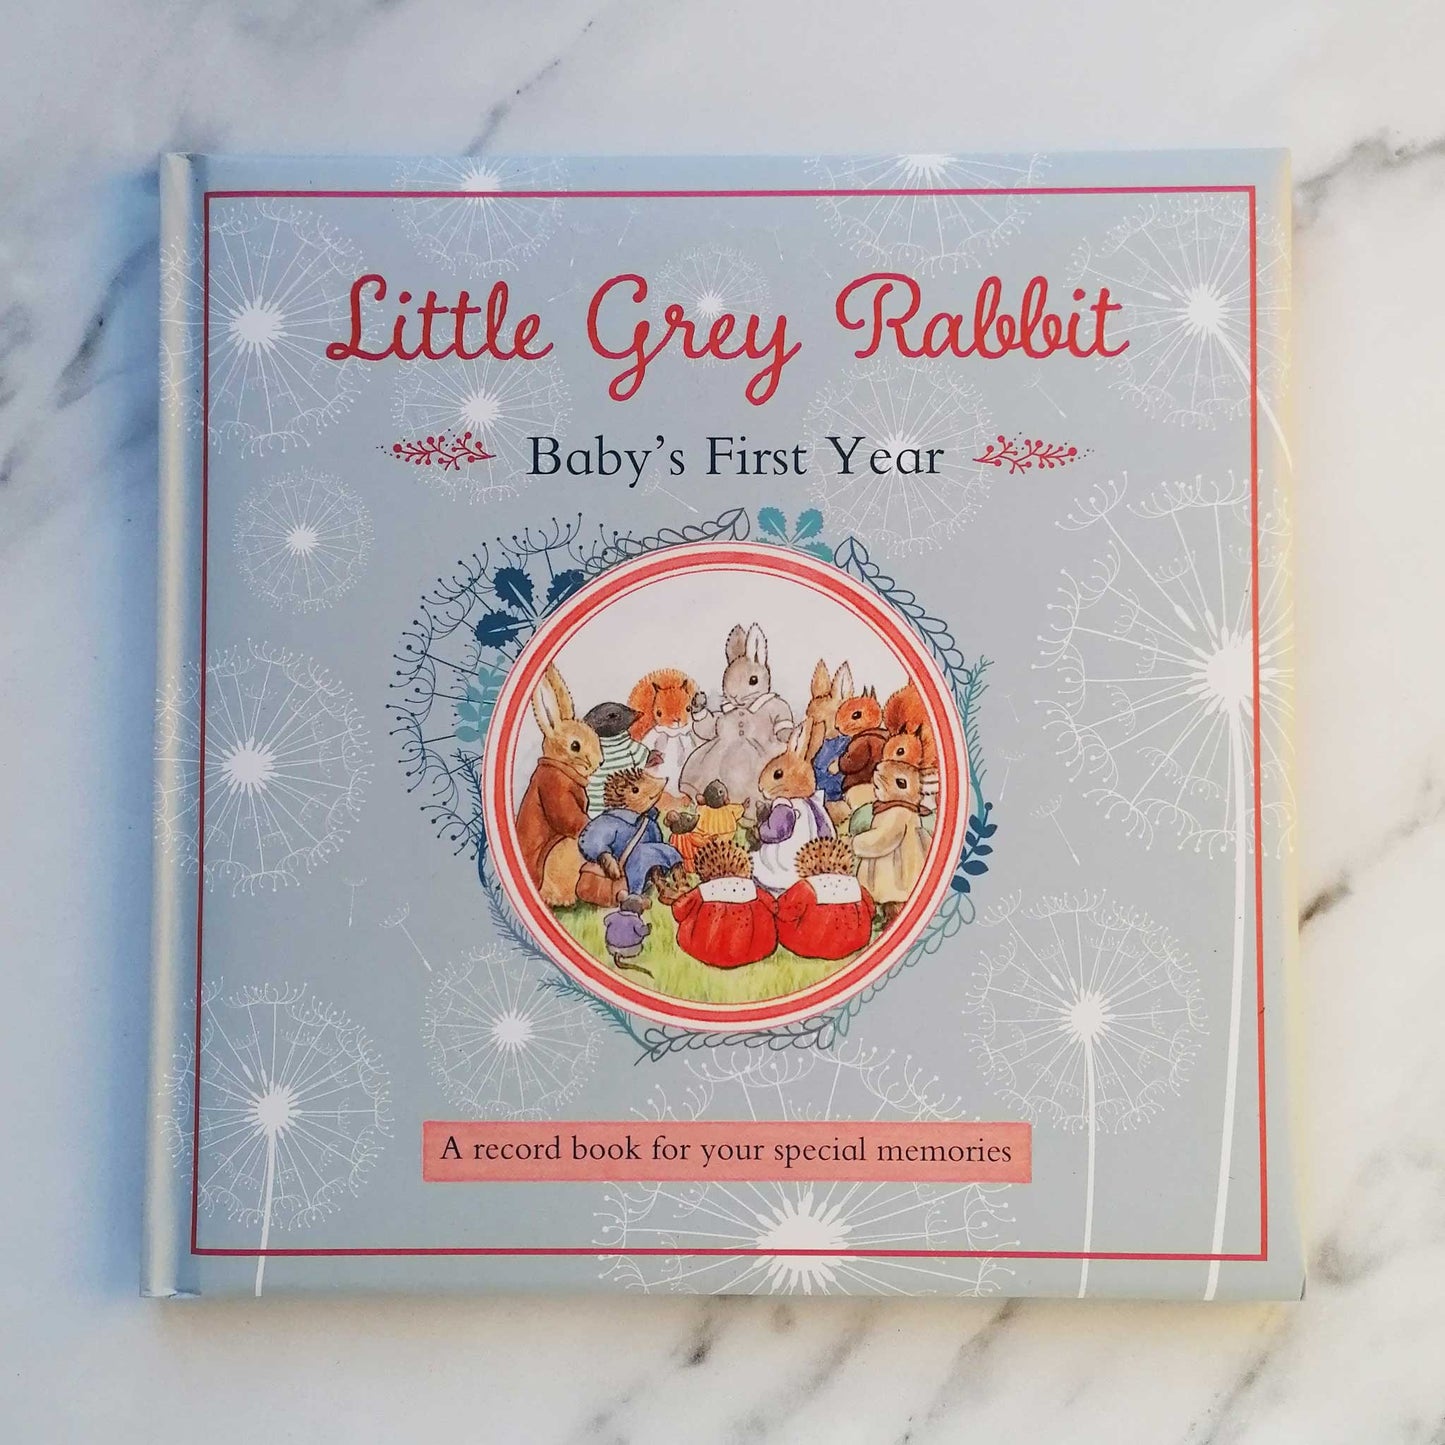 Our Bookshelf Print Books Baby's First Year Record Book - Little Grey Rabbit